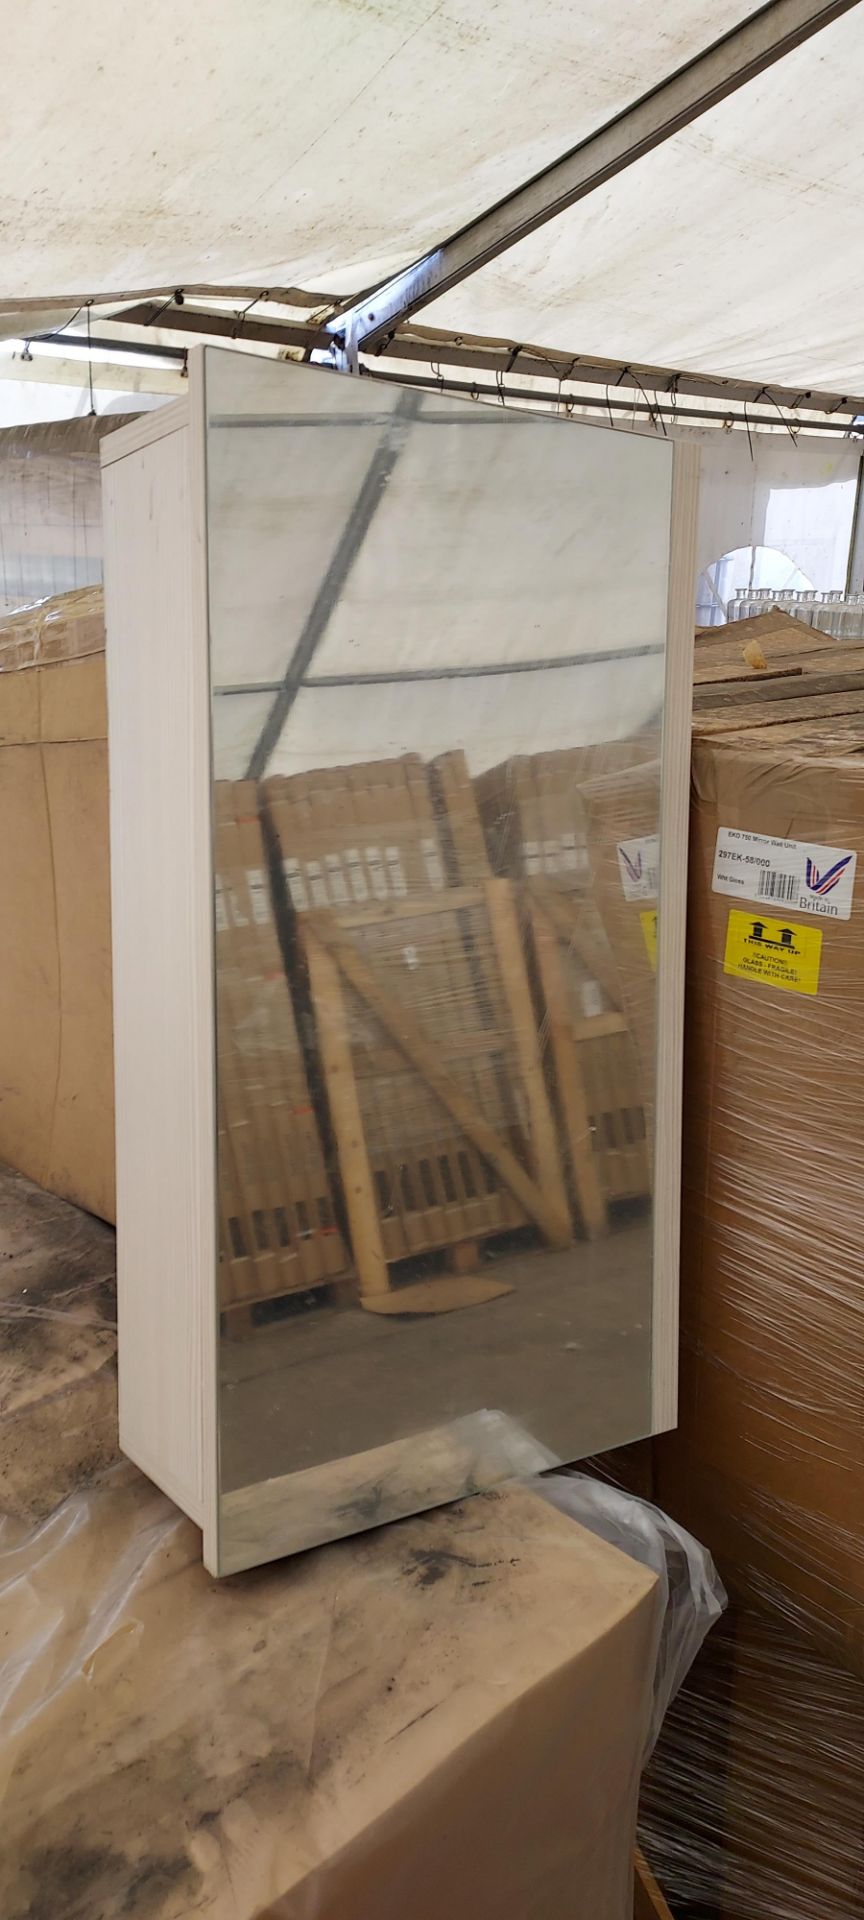 10 X BRAND NEW ELATION 750 MIRROR CABINET WITH GAS LIFT - ALL IN AVOLA WHITE ( CODE 29269/408)